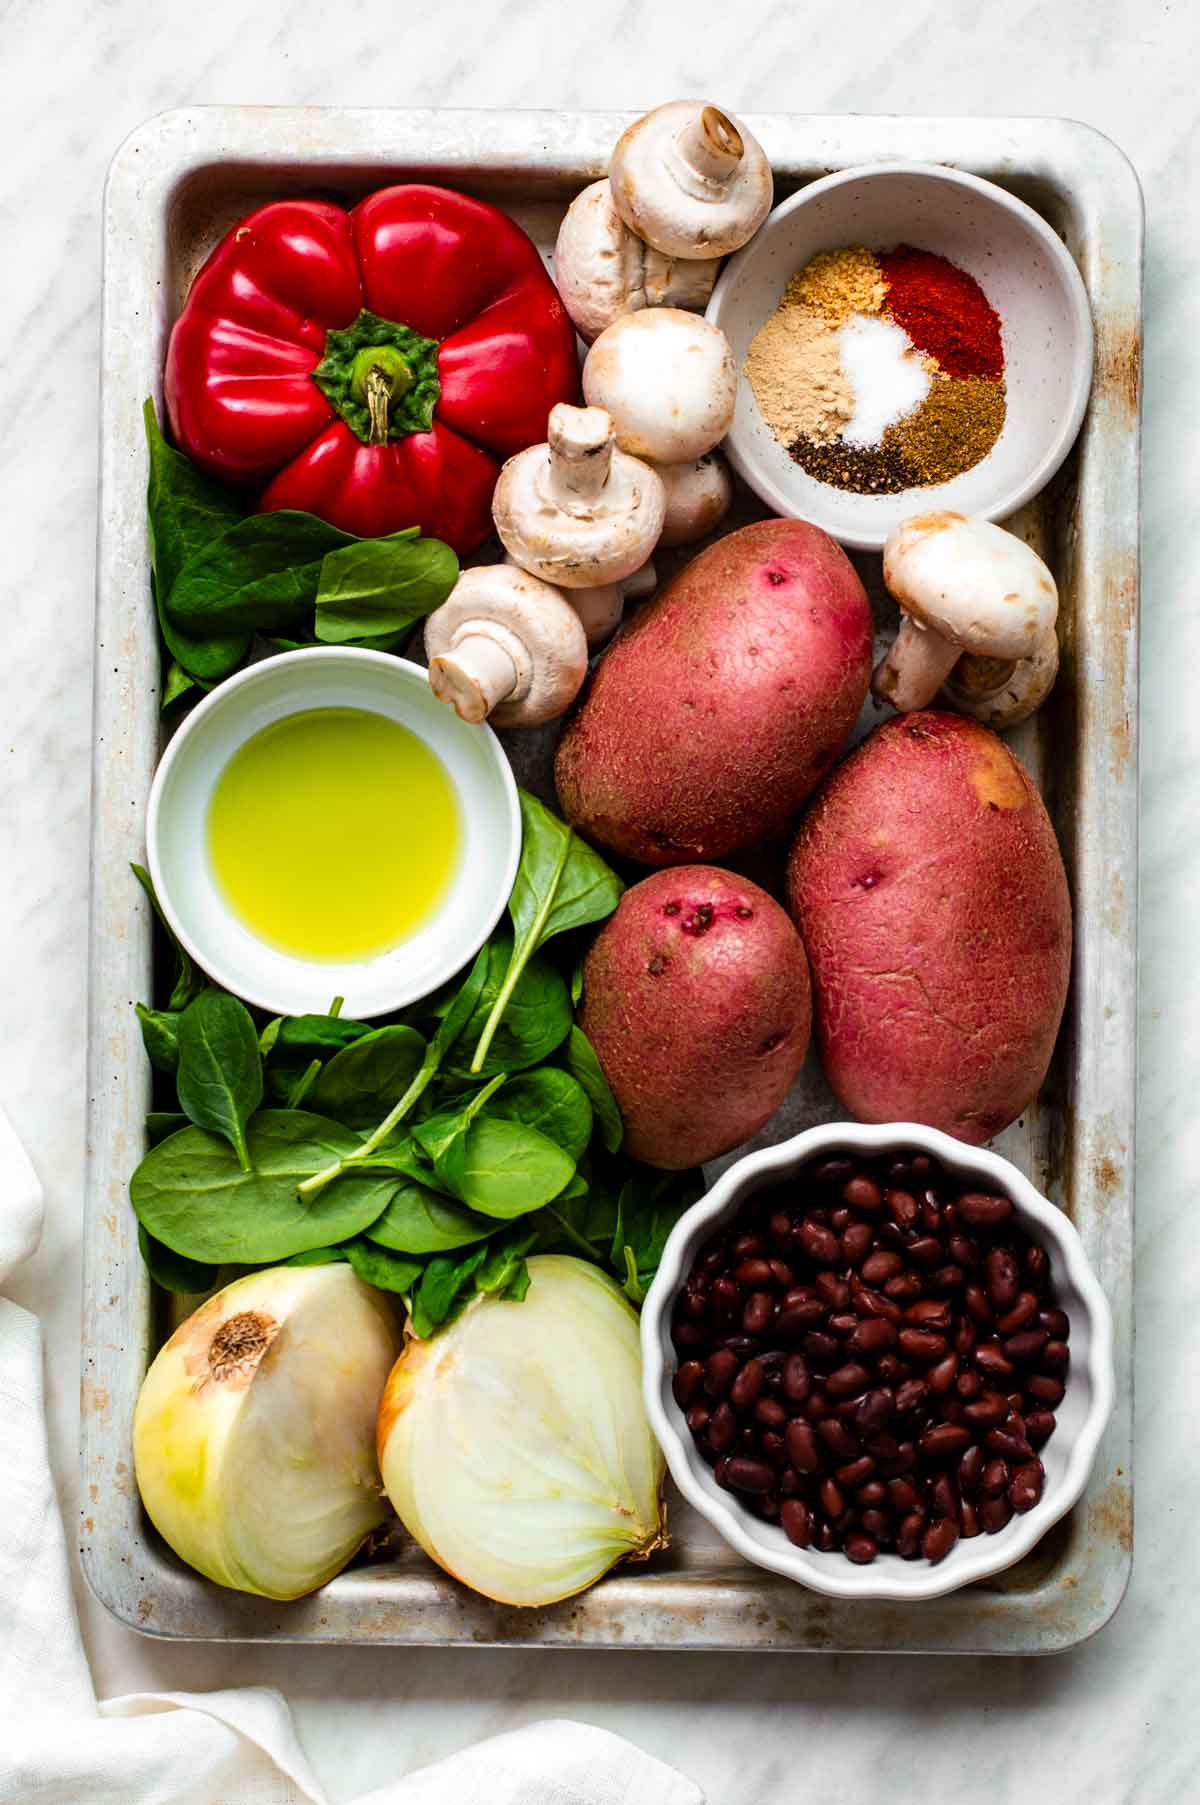 Gathered ingredients for this vegetable hash on a baking tray.